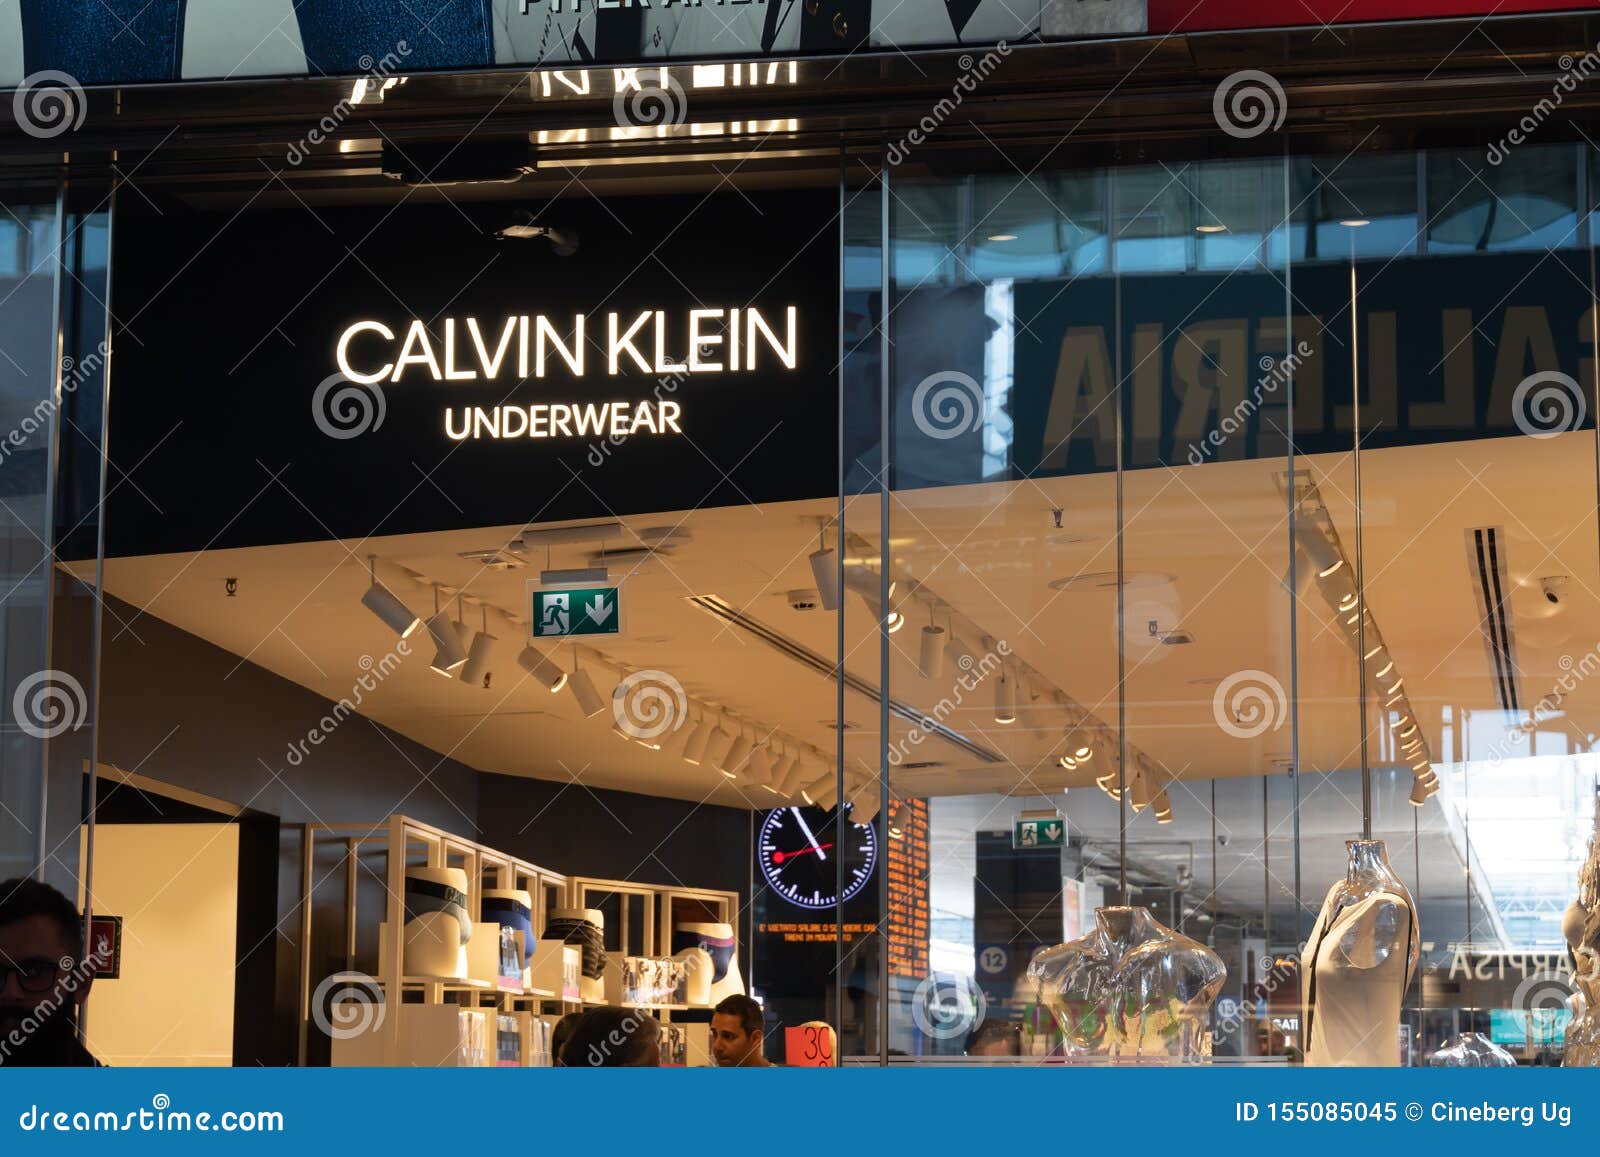 https://thumbs.dreamstime.com/z/rome-italy-july-calvin-klein-underwear-store-signage-calvin-klein-inc-american-fashion-house-founded-designer-calvin-155085045.jpg